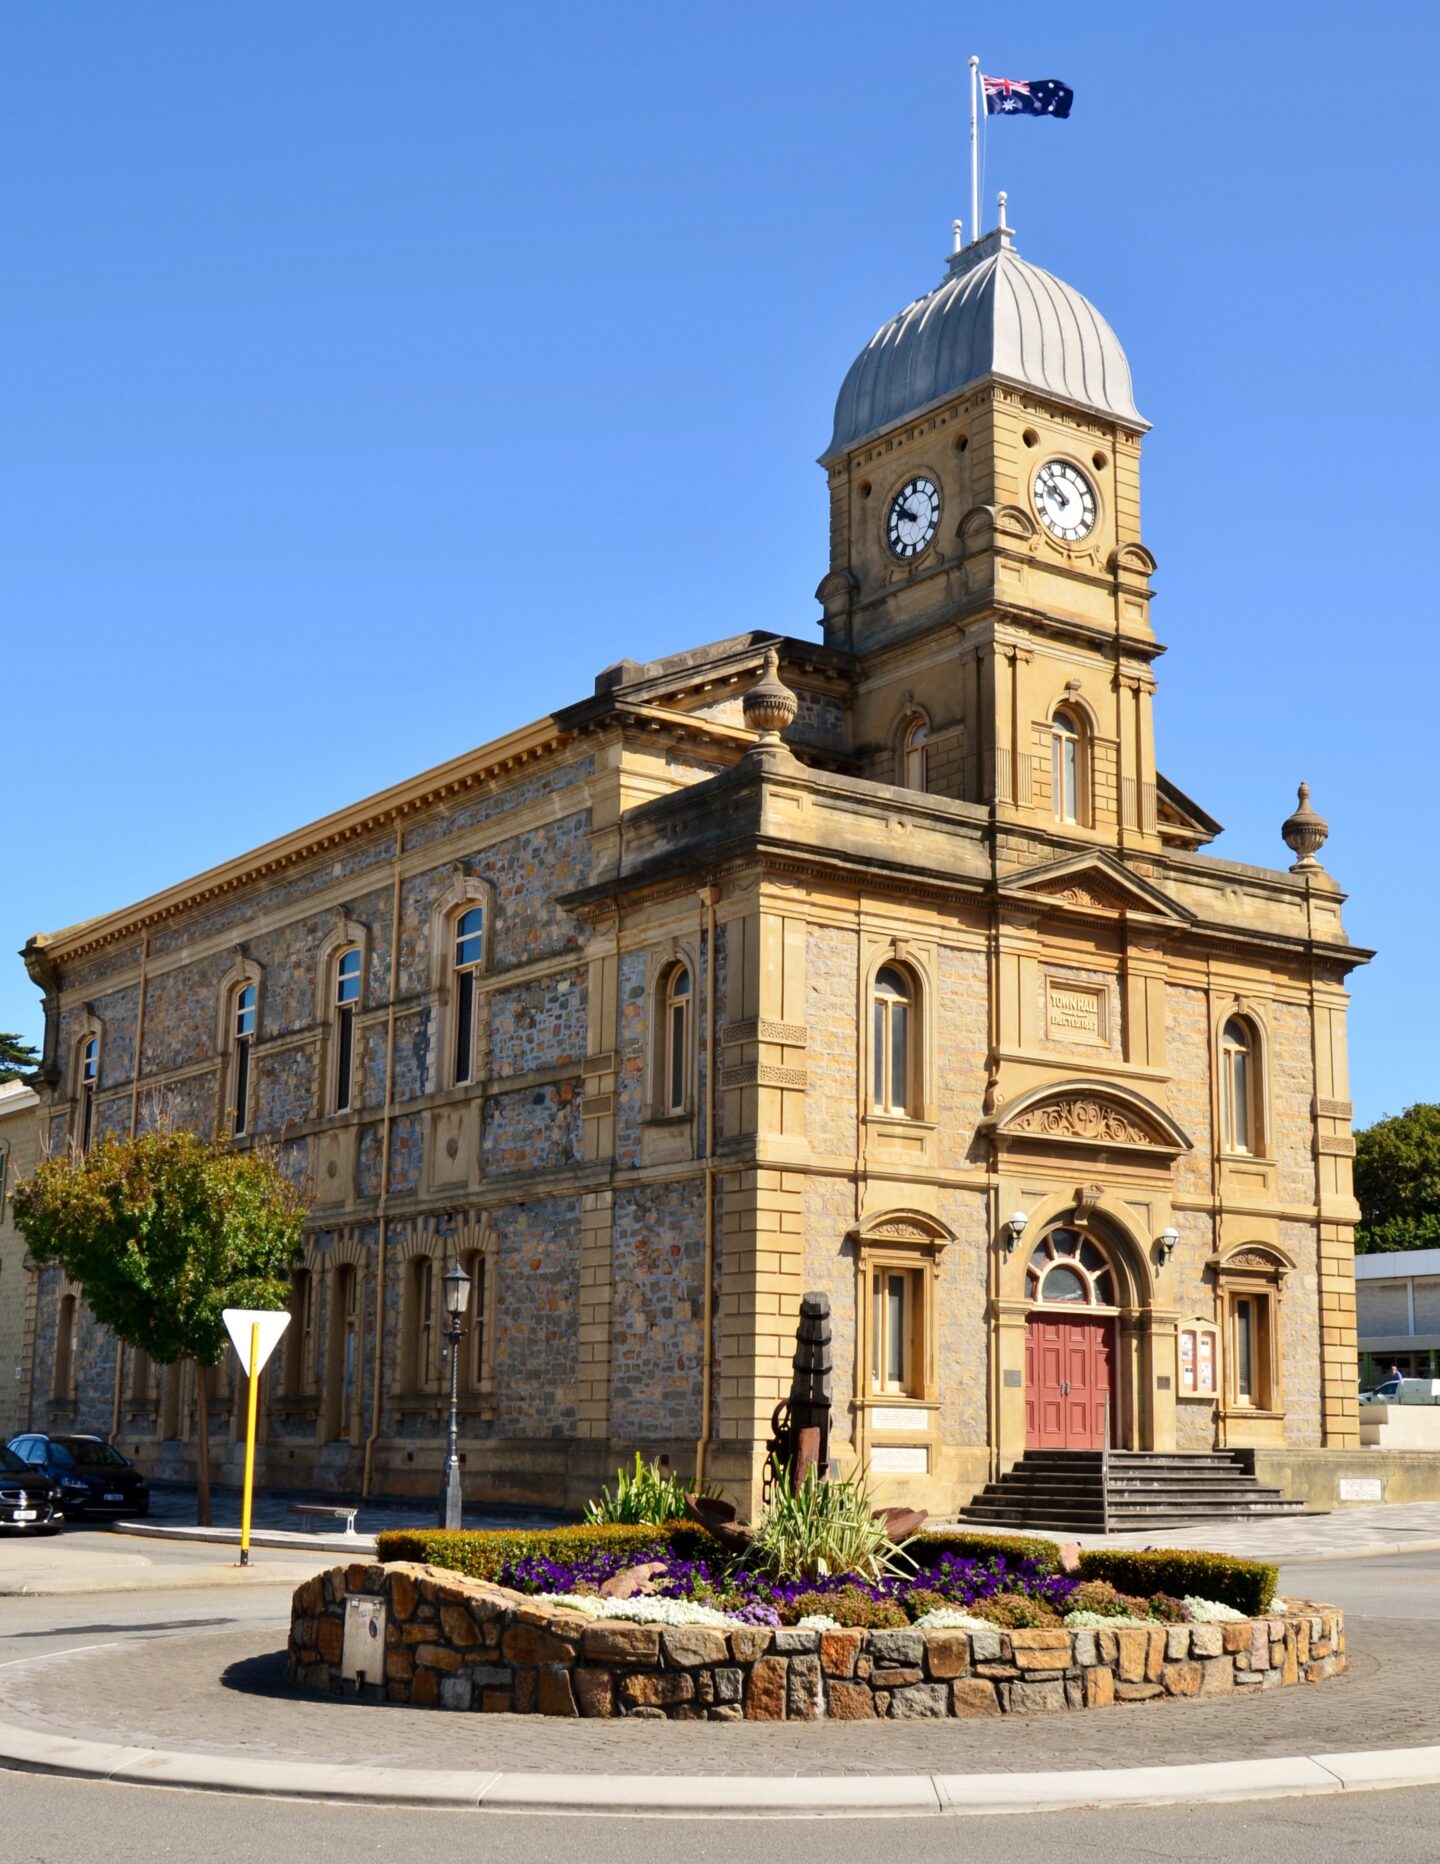 Albany Town Hall